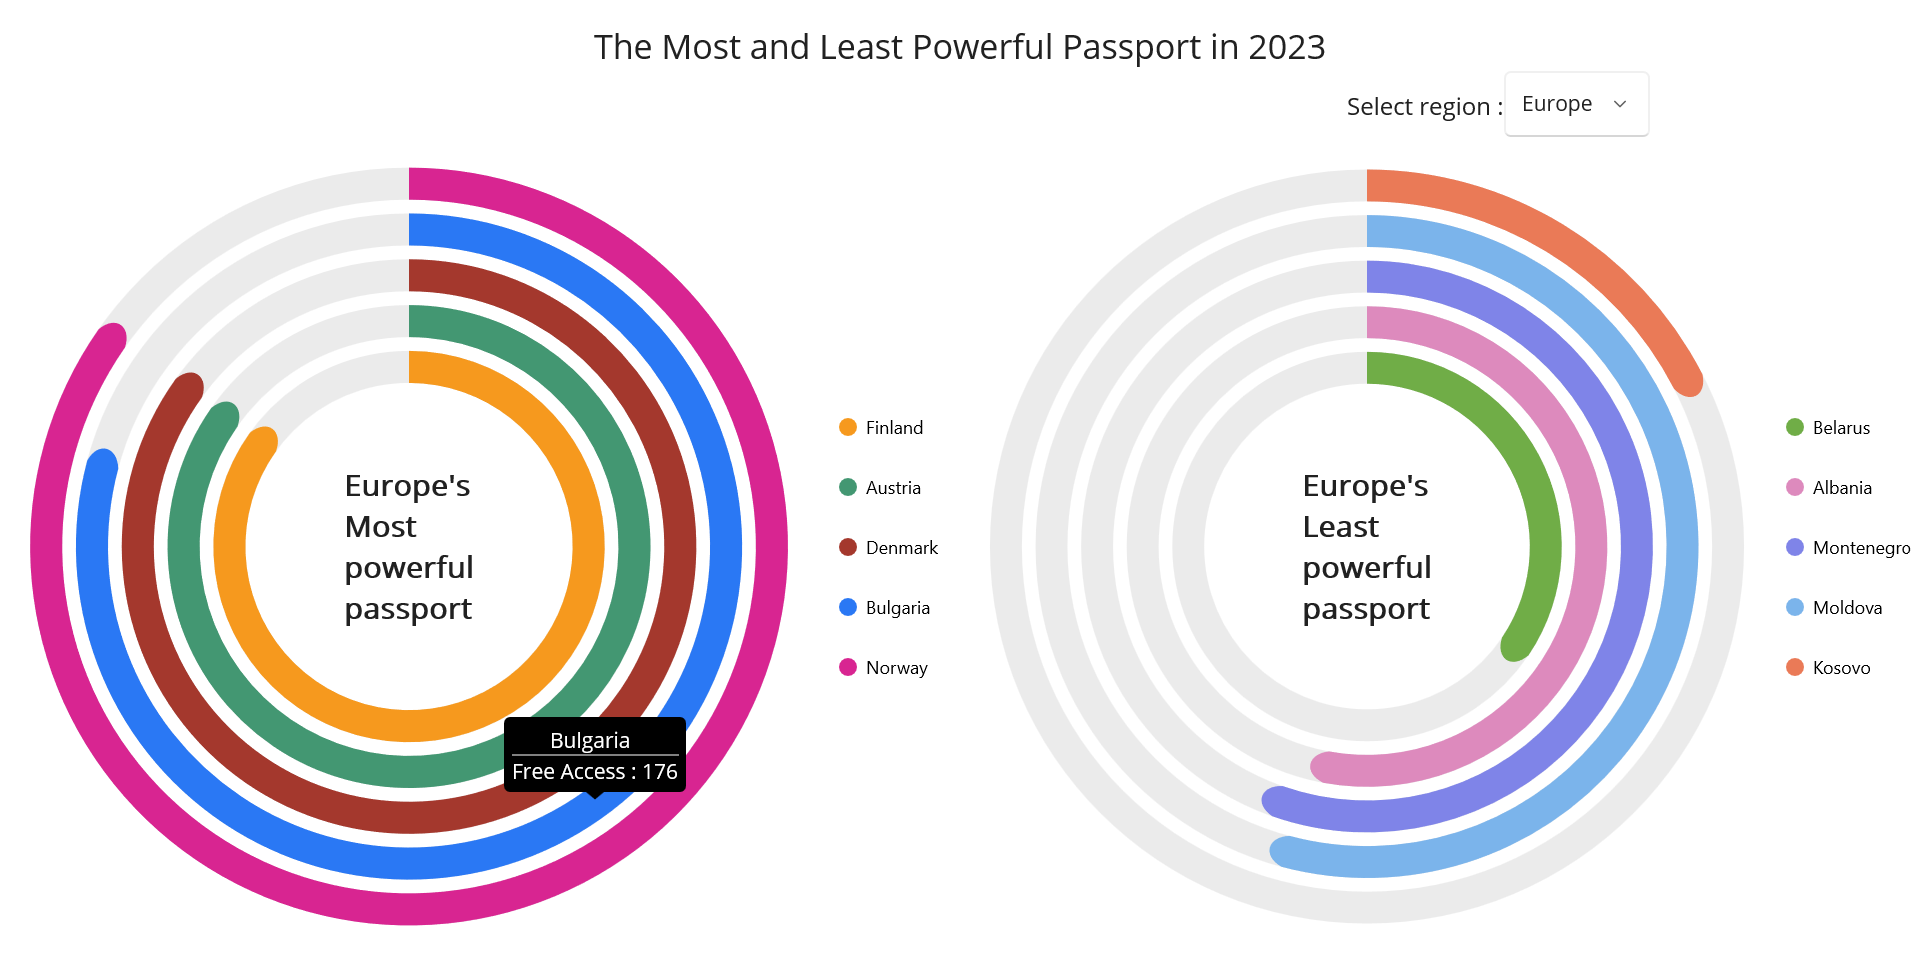 Visualizing the most and least powerful passports in 2023 using Syncfusion’s .NET MAUI Radial Bar Chart